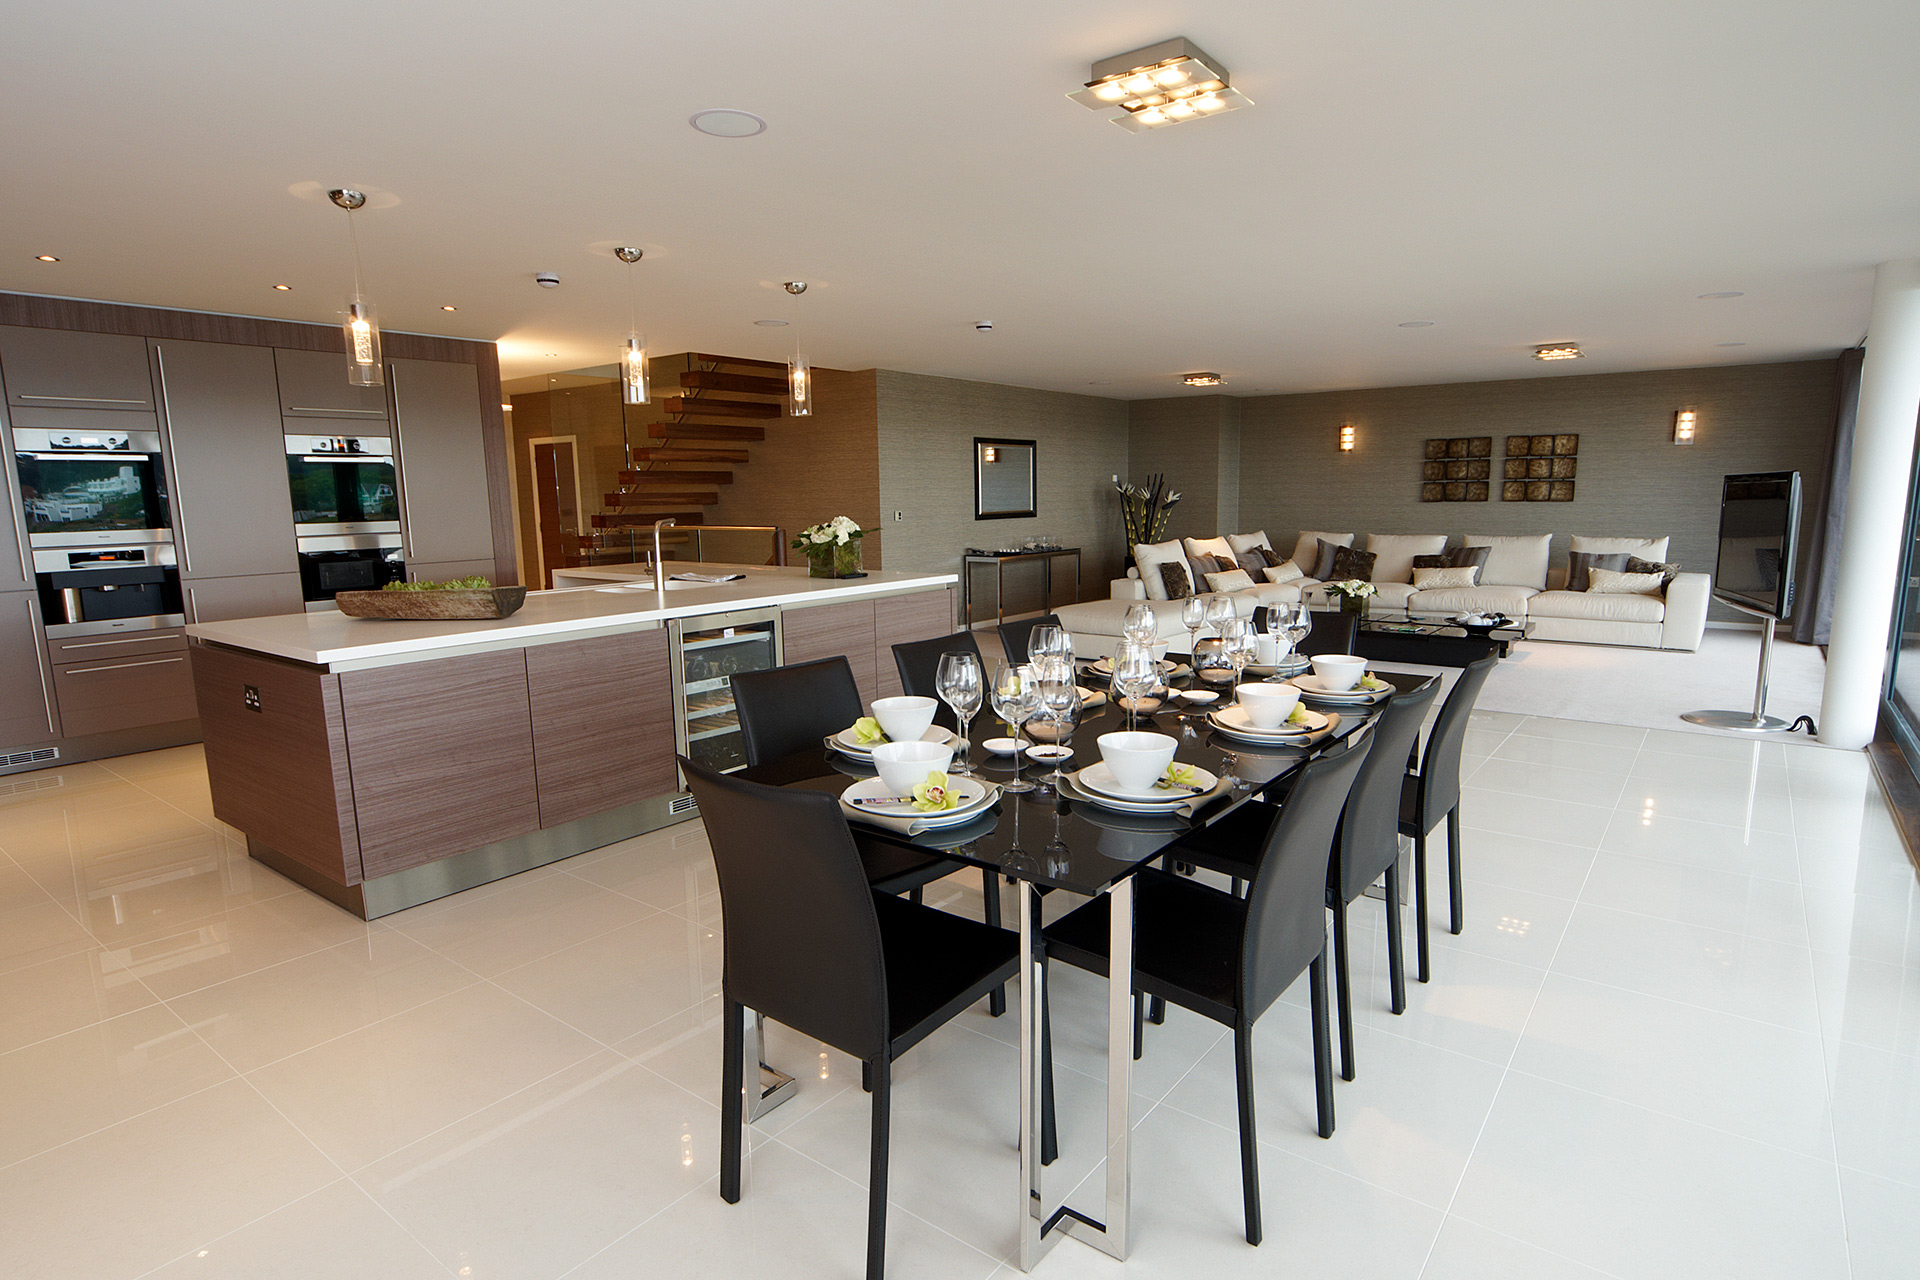 open plan kitchen living and dining area in grey and brown tones